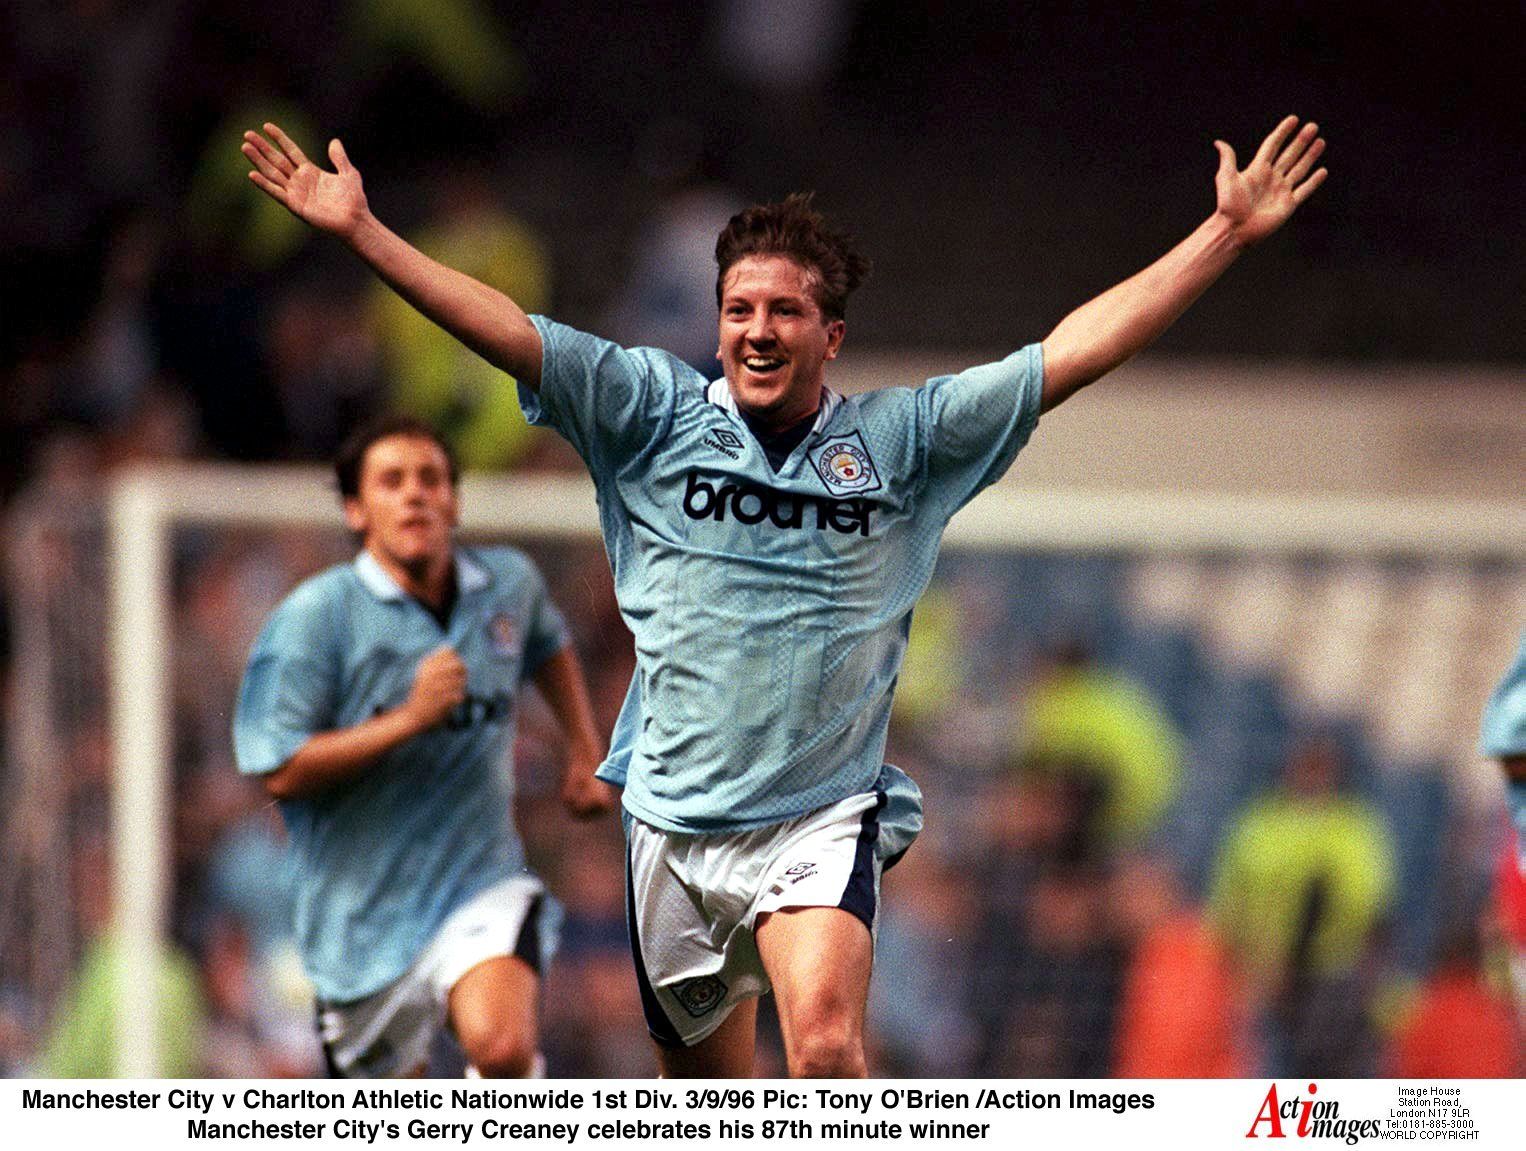 Manchester City v Charlton Athletic Nationwide 1st Div. 3/9/96 Pic: Tony O'Brien /Action Images 
Manchester City's Gerry Creaney celebrates his 87th minute winner